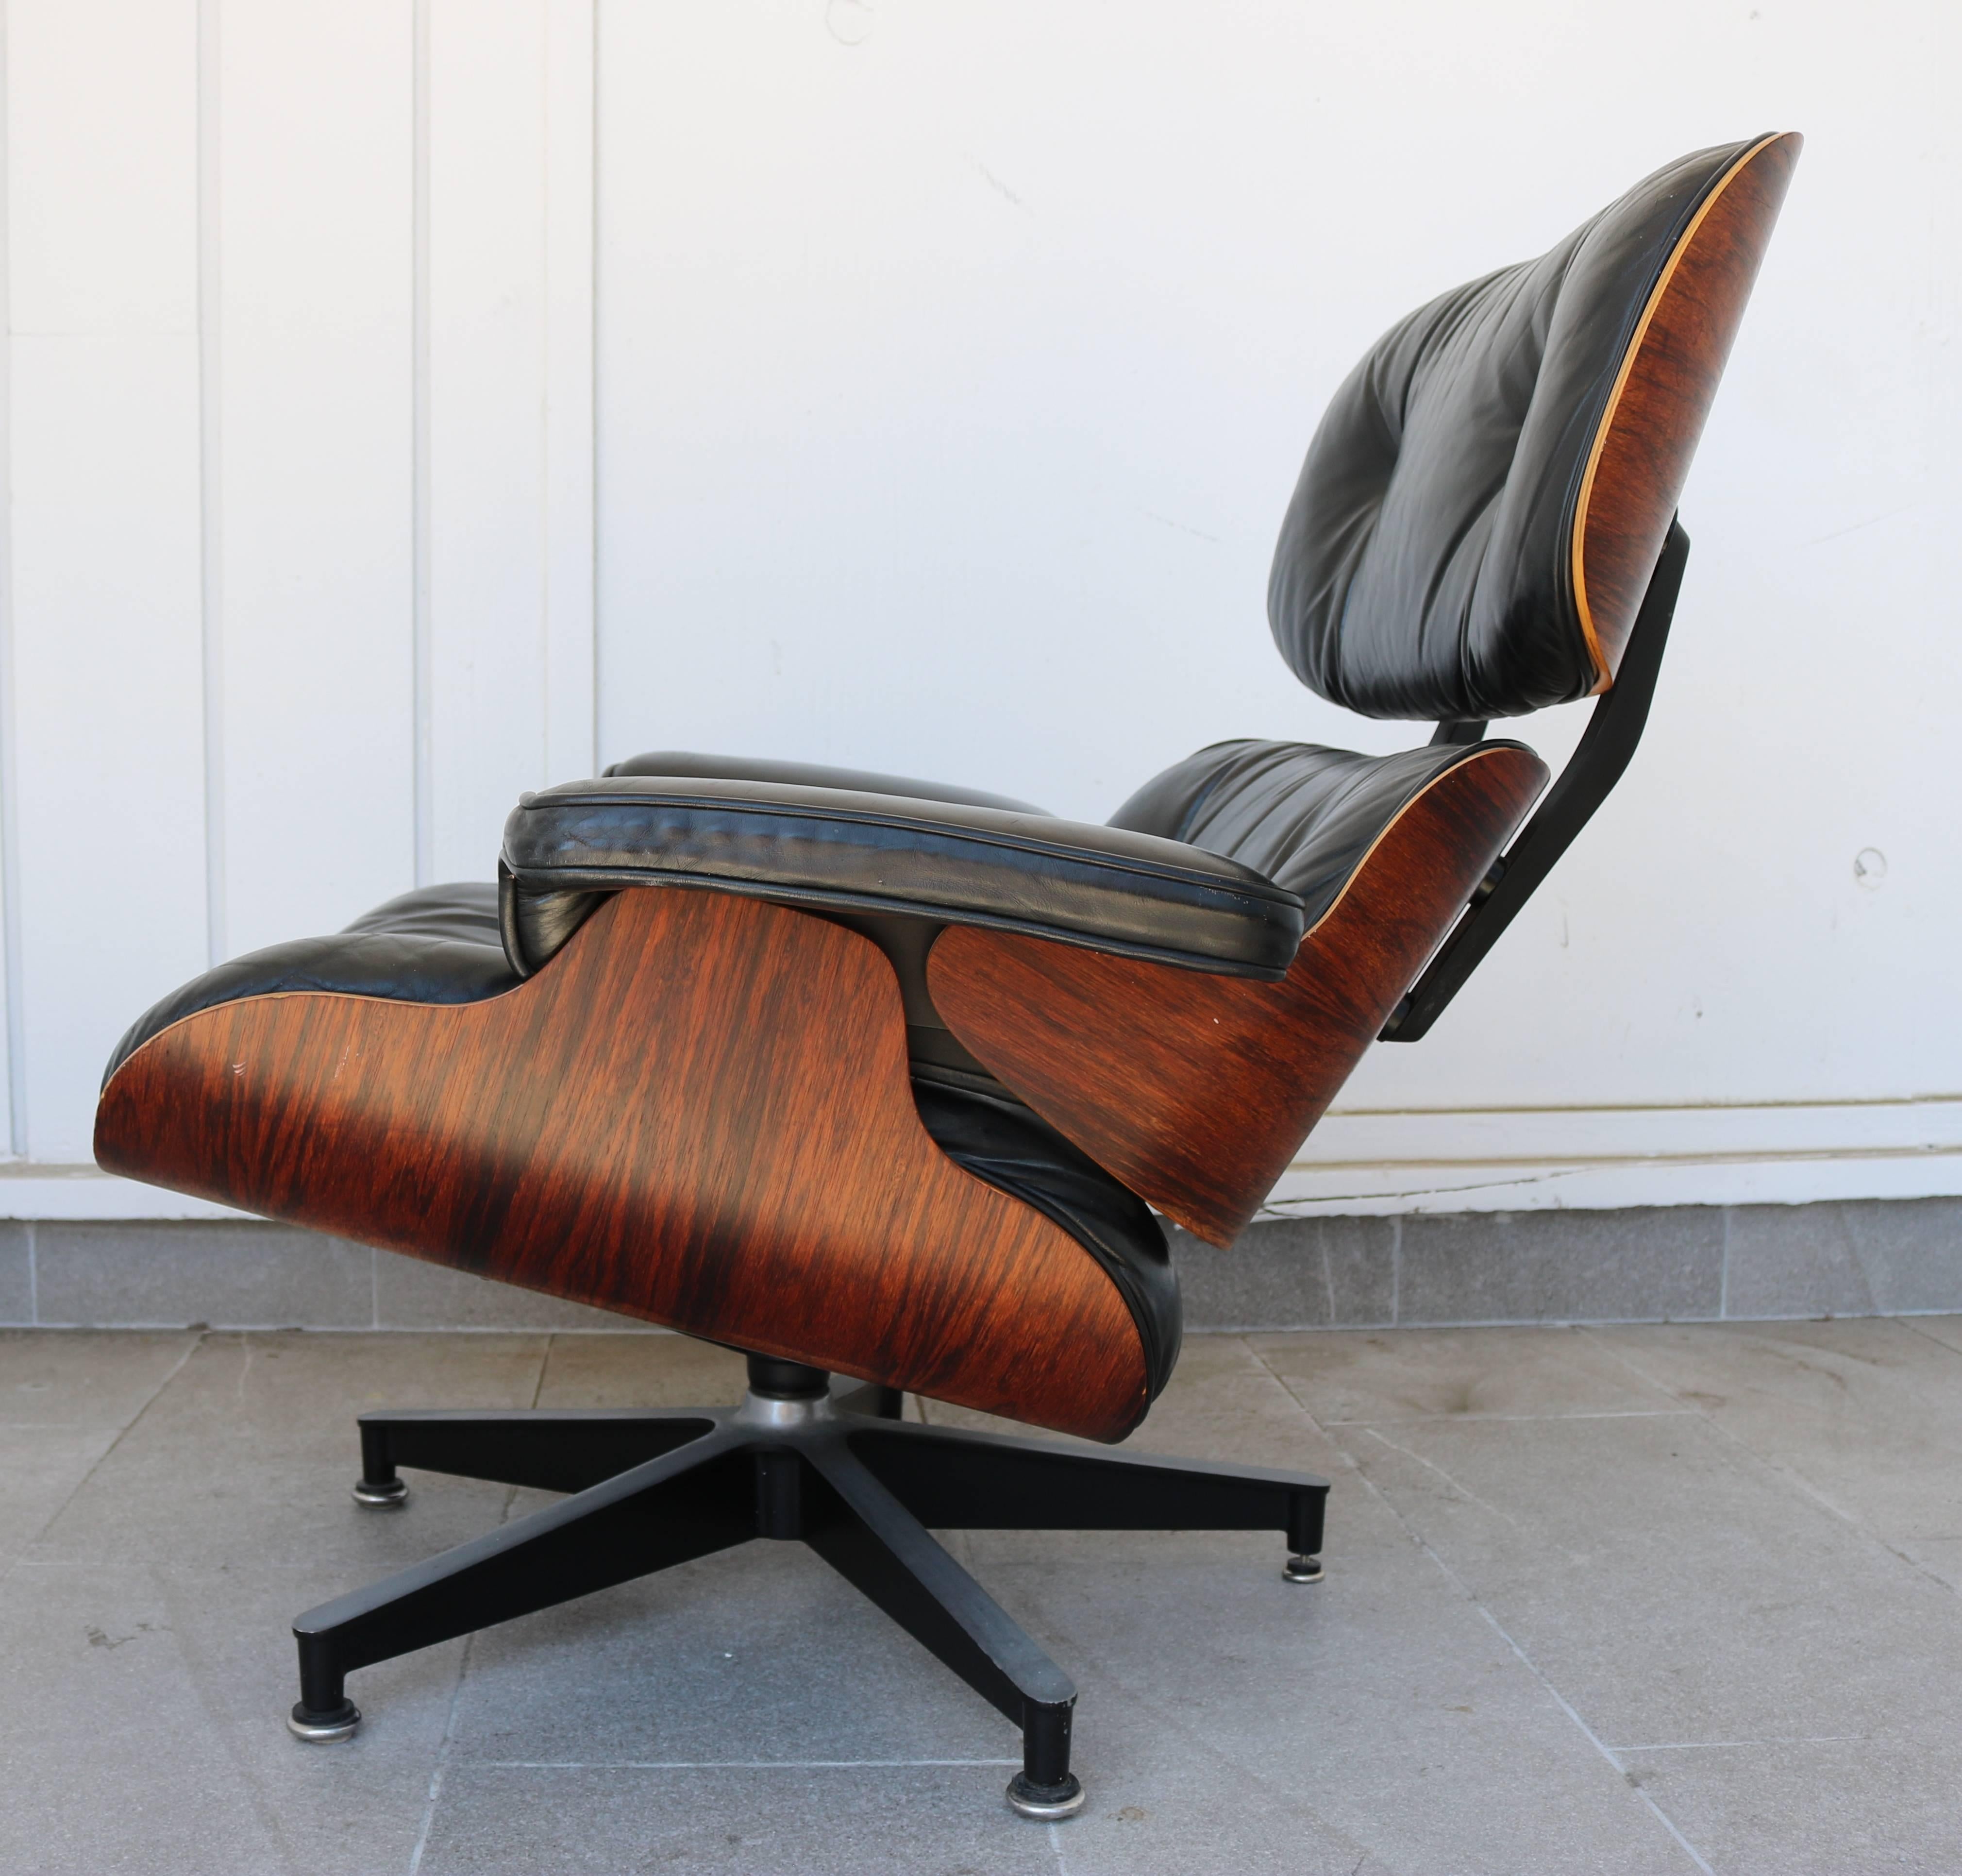 This five-legged chair is made of molded plywood and leather, designed by Charles and Ray Eames for the Herman Miller furniture company in 1956. It is officially titled Eames Lounge 670 and was released in 1956 after years of development by